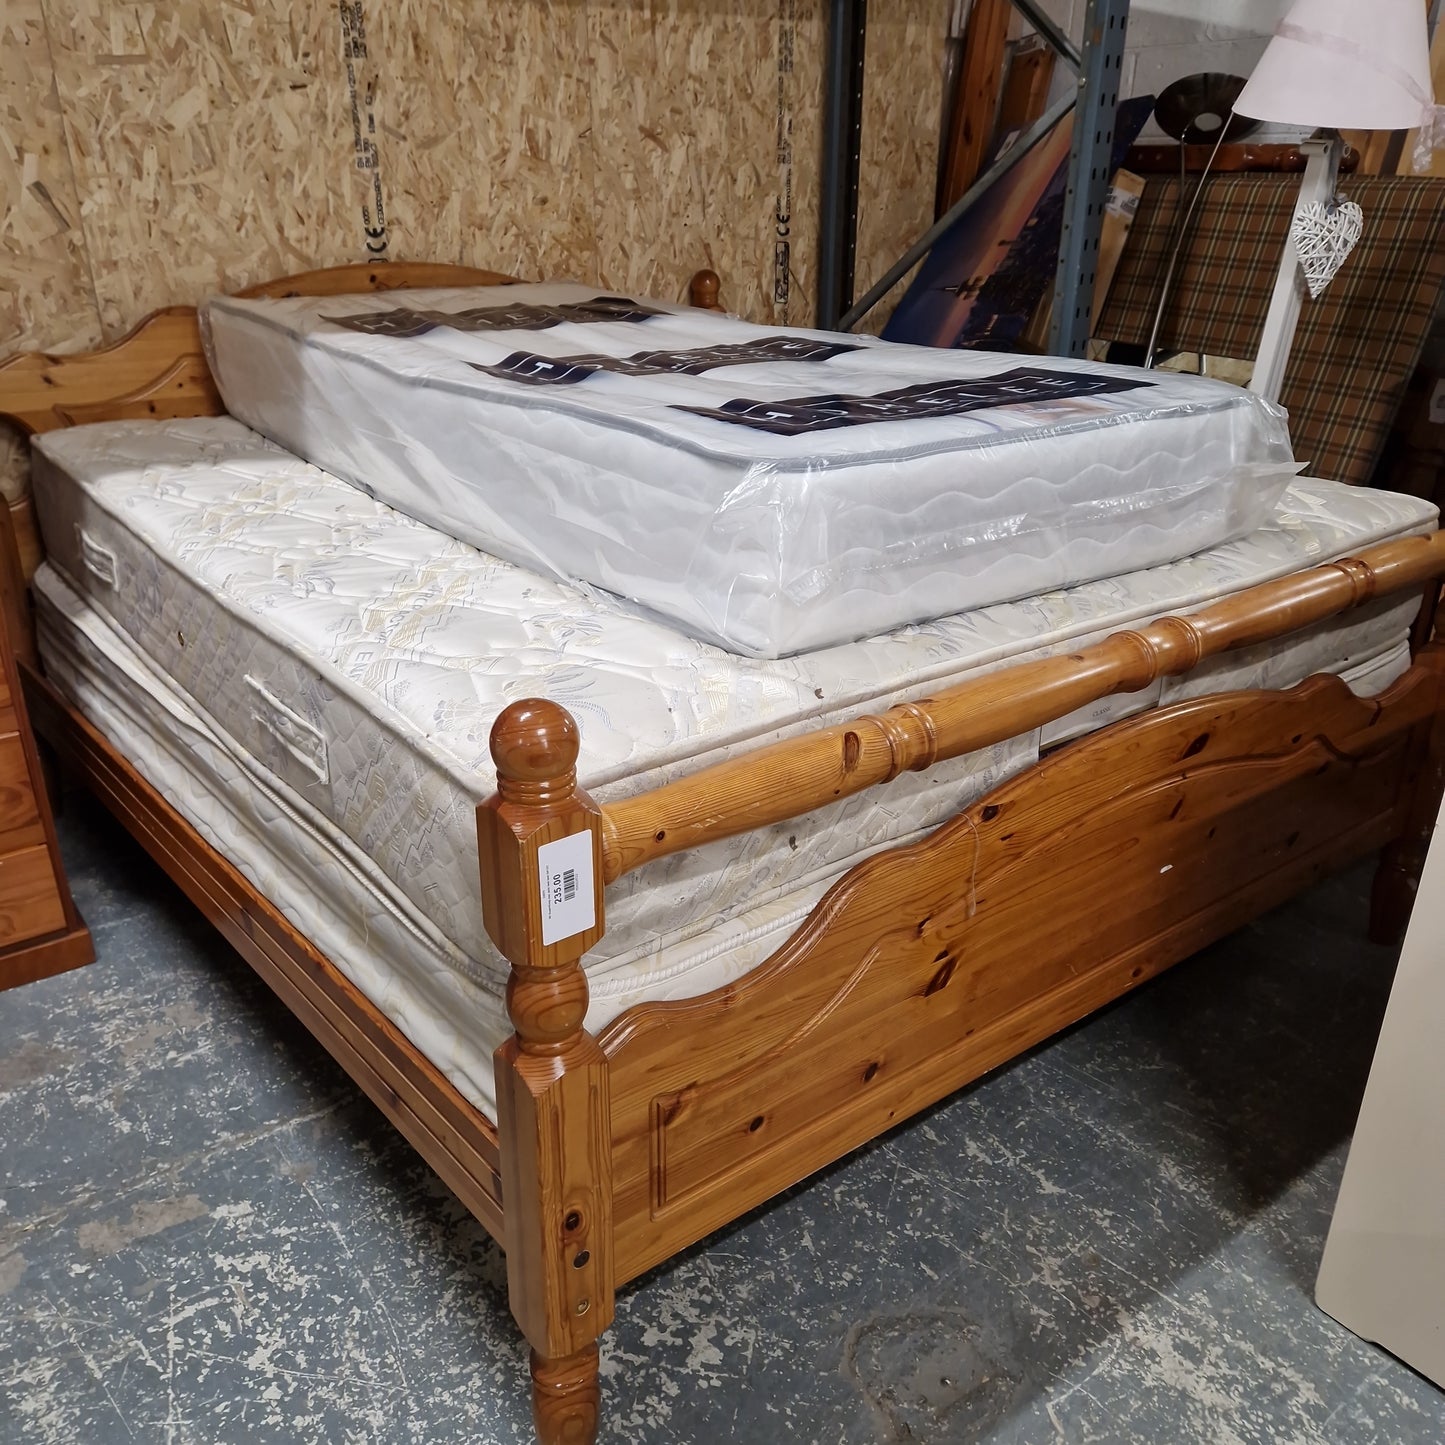 6ft SuperKing size pine bed bed